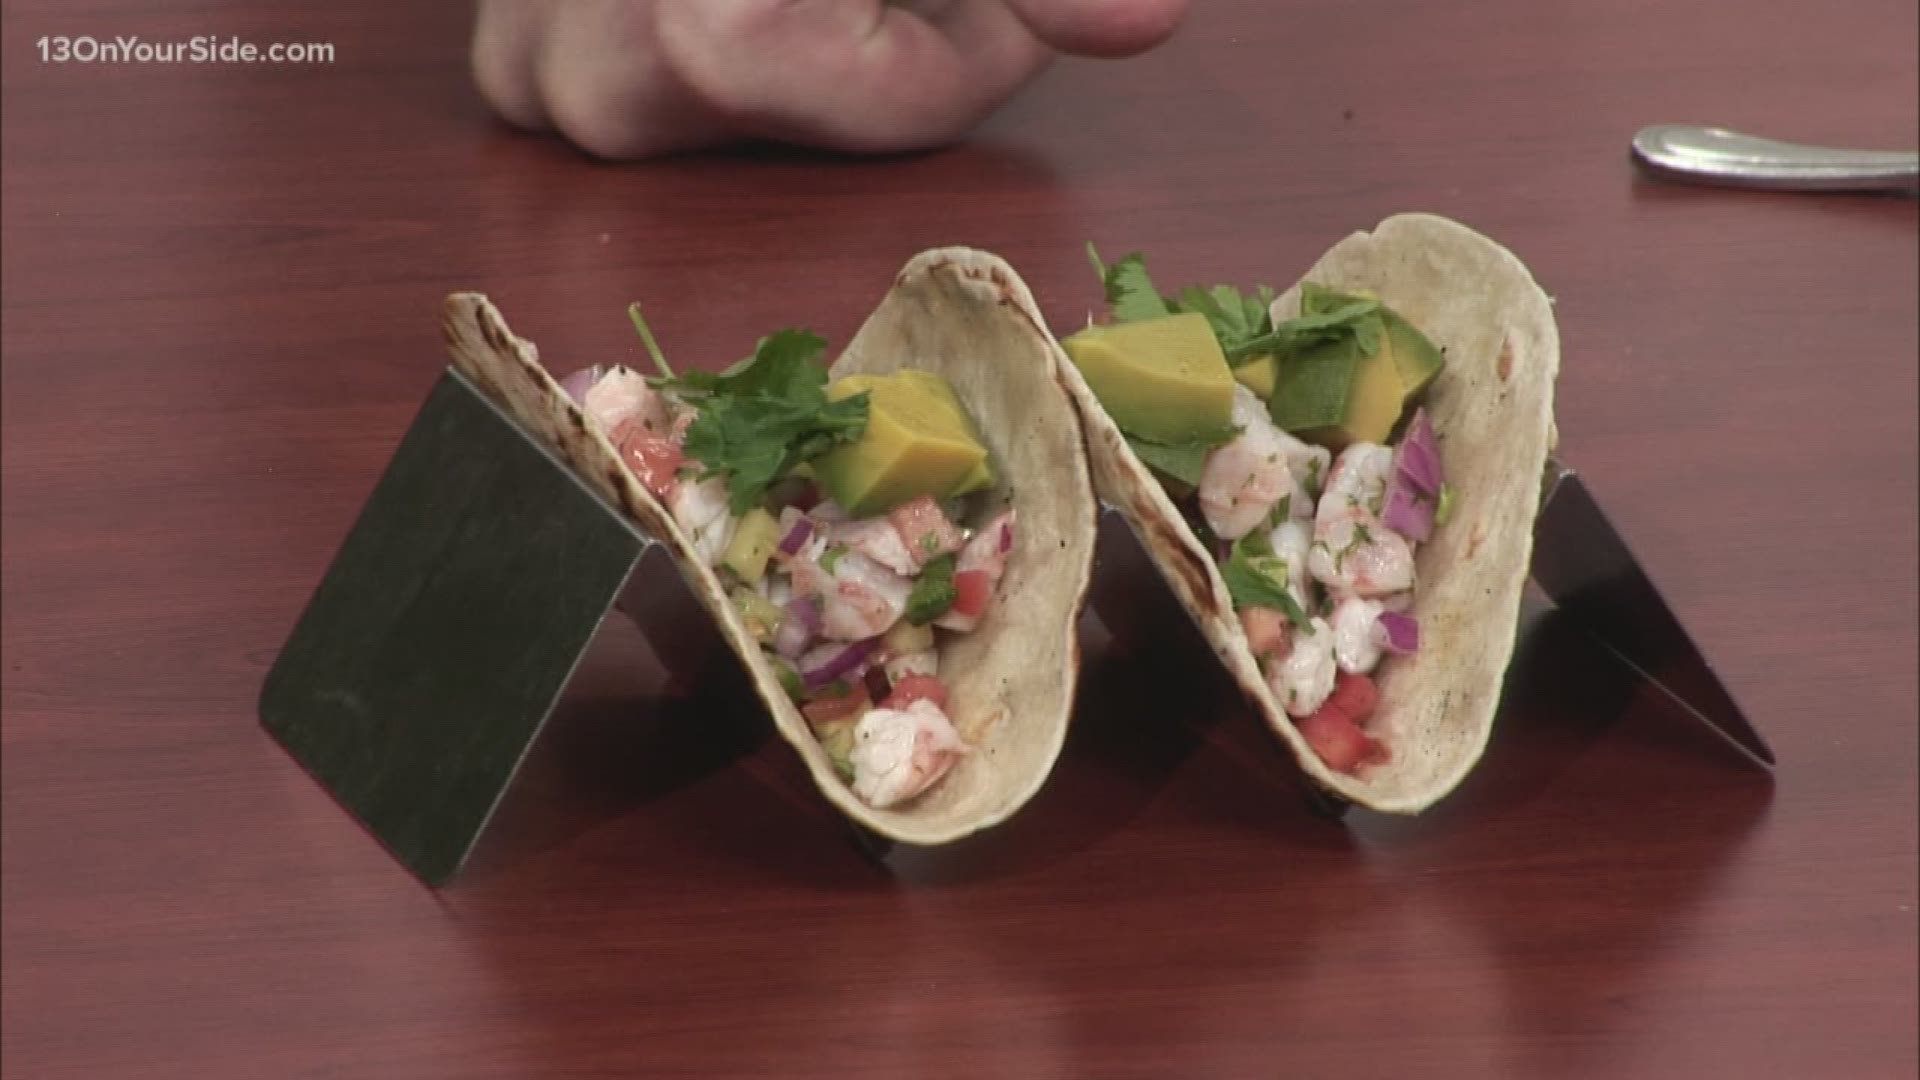 If you're still trying to hang on to summer, check out this shrimp ceviche recipe from Chef Ryan at Rush Creek Bistro. He also shared some fun events that are happening at the restaurant.